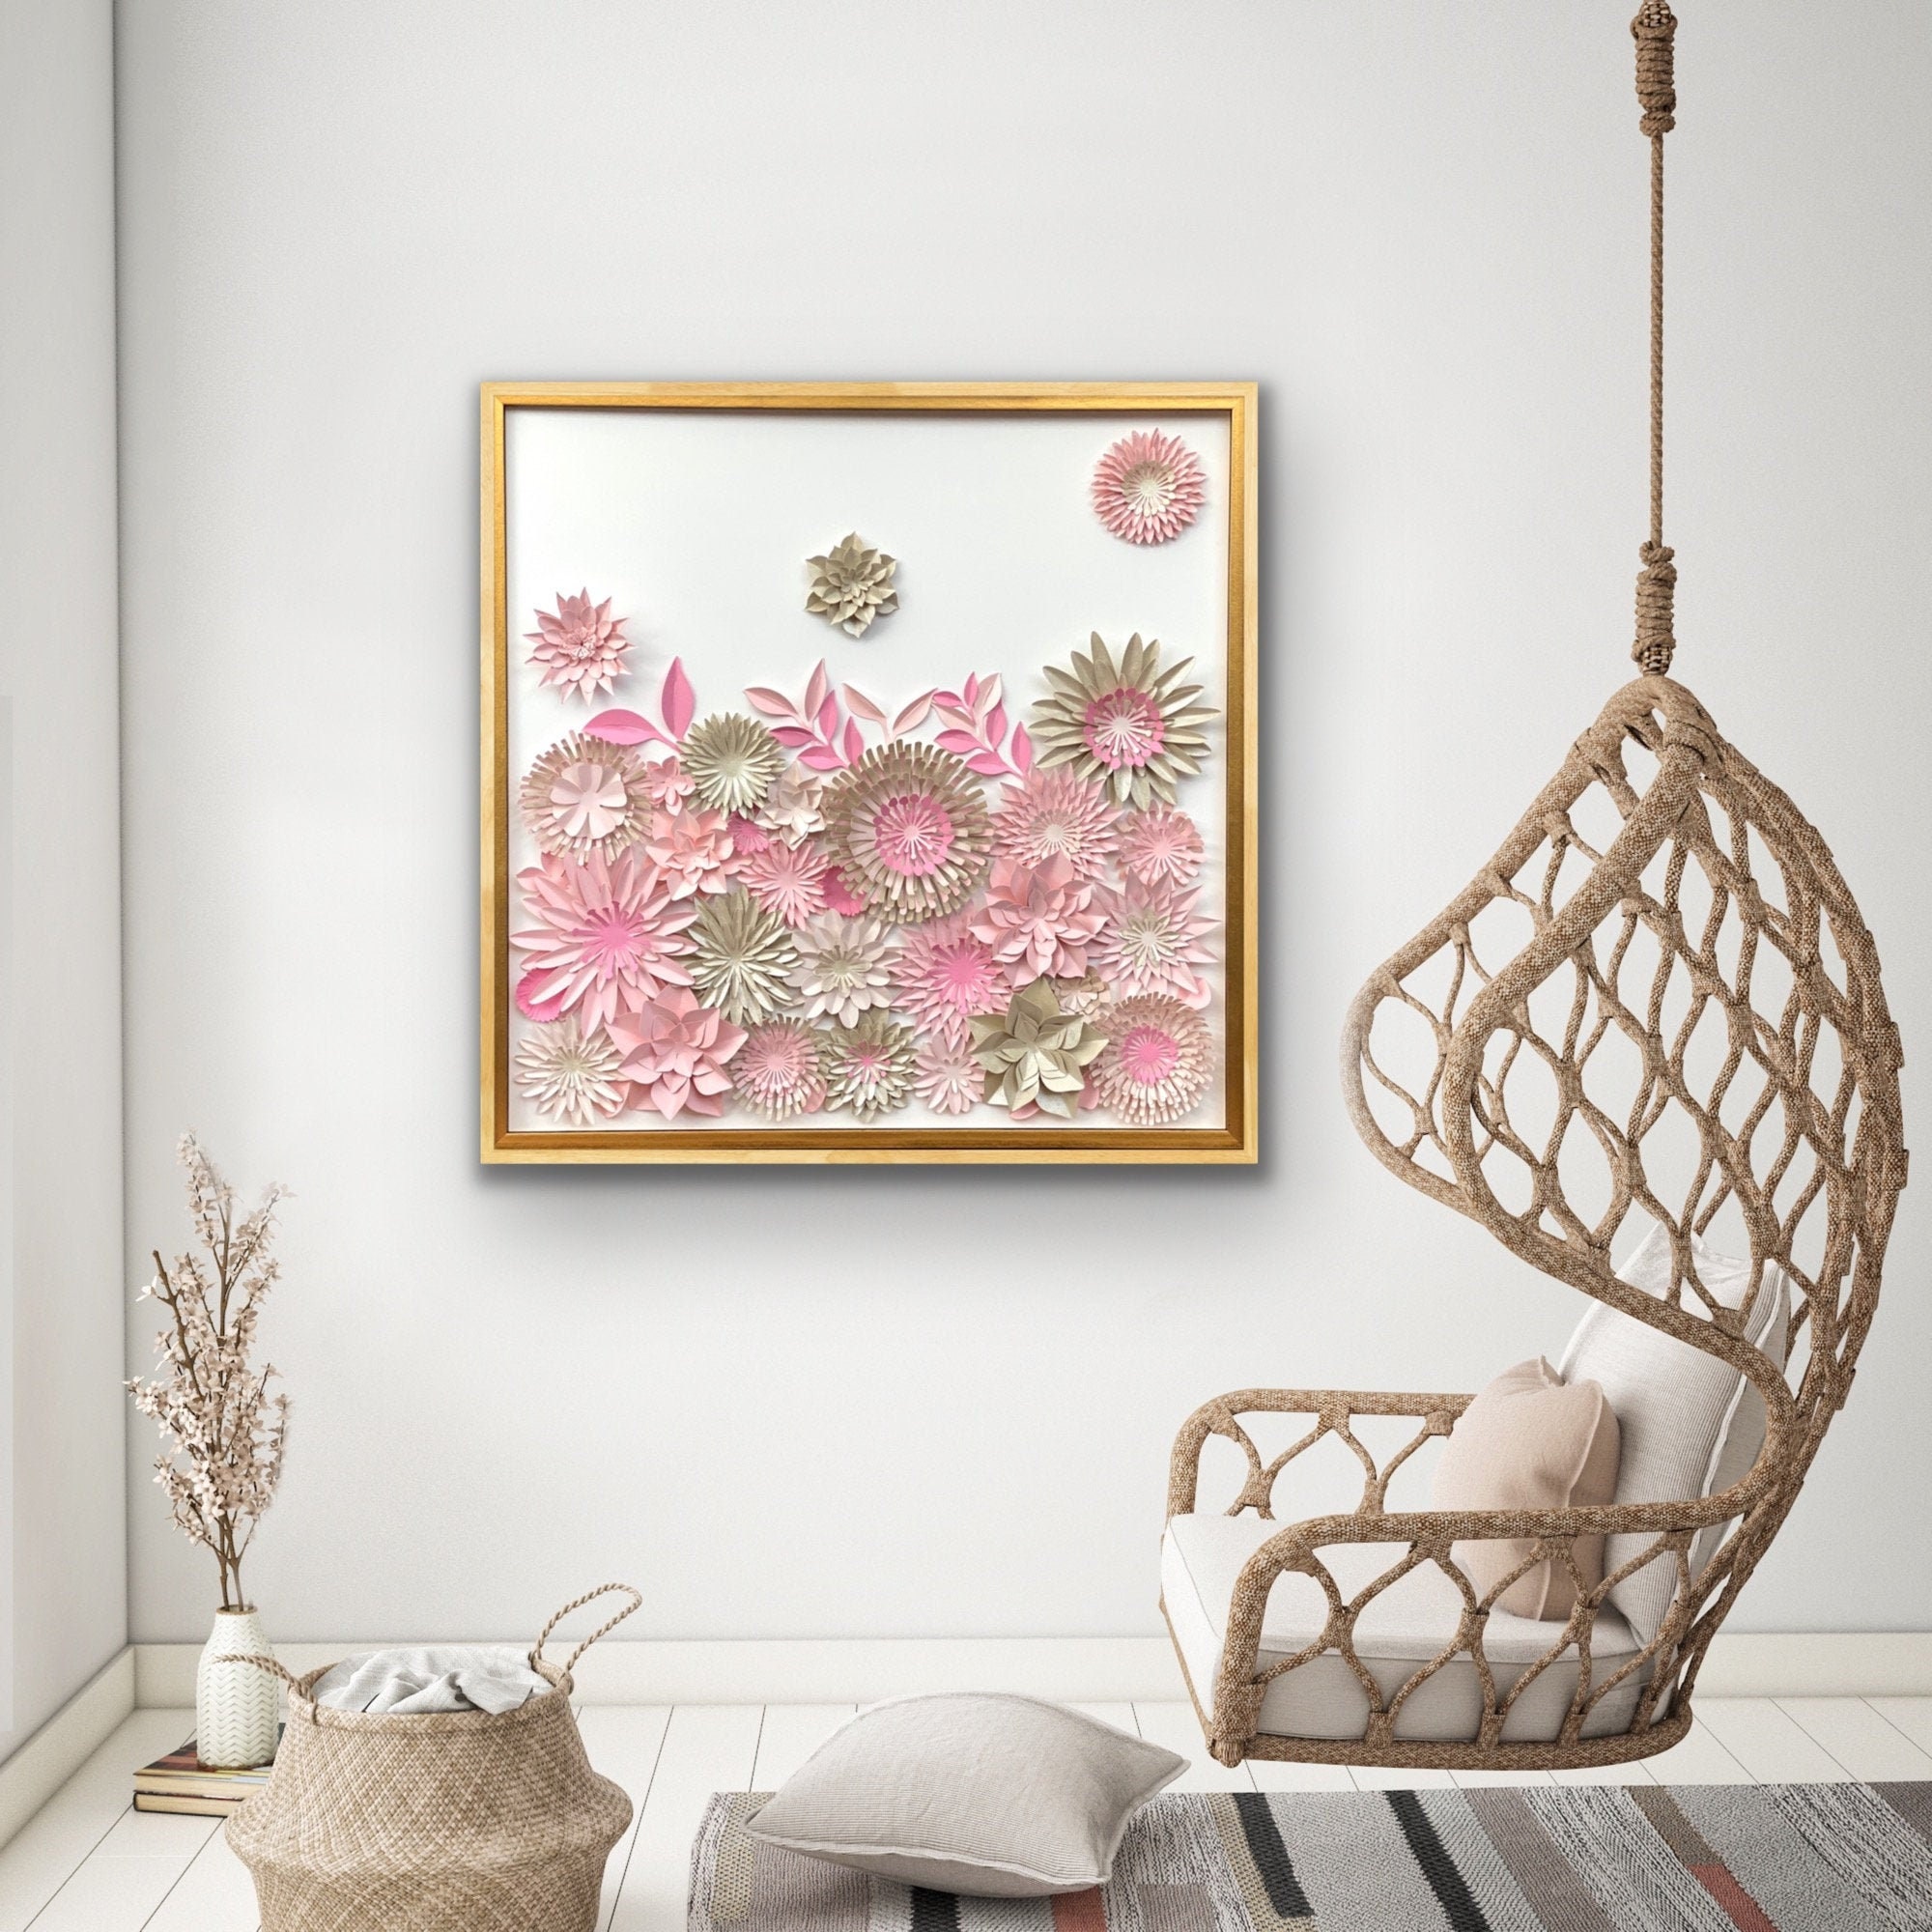 large 30 inch - Pink Beige Flowers Collage 3D Modern Wall ... on Large Wall Sconces 30 Inches And More id=62021